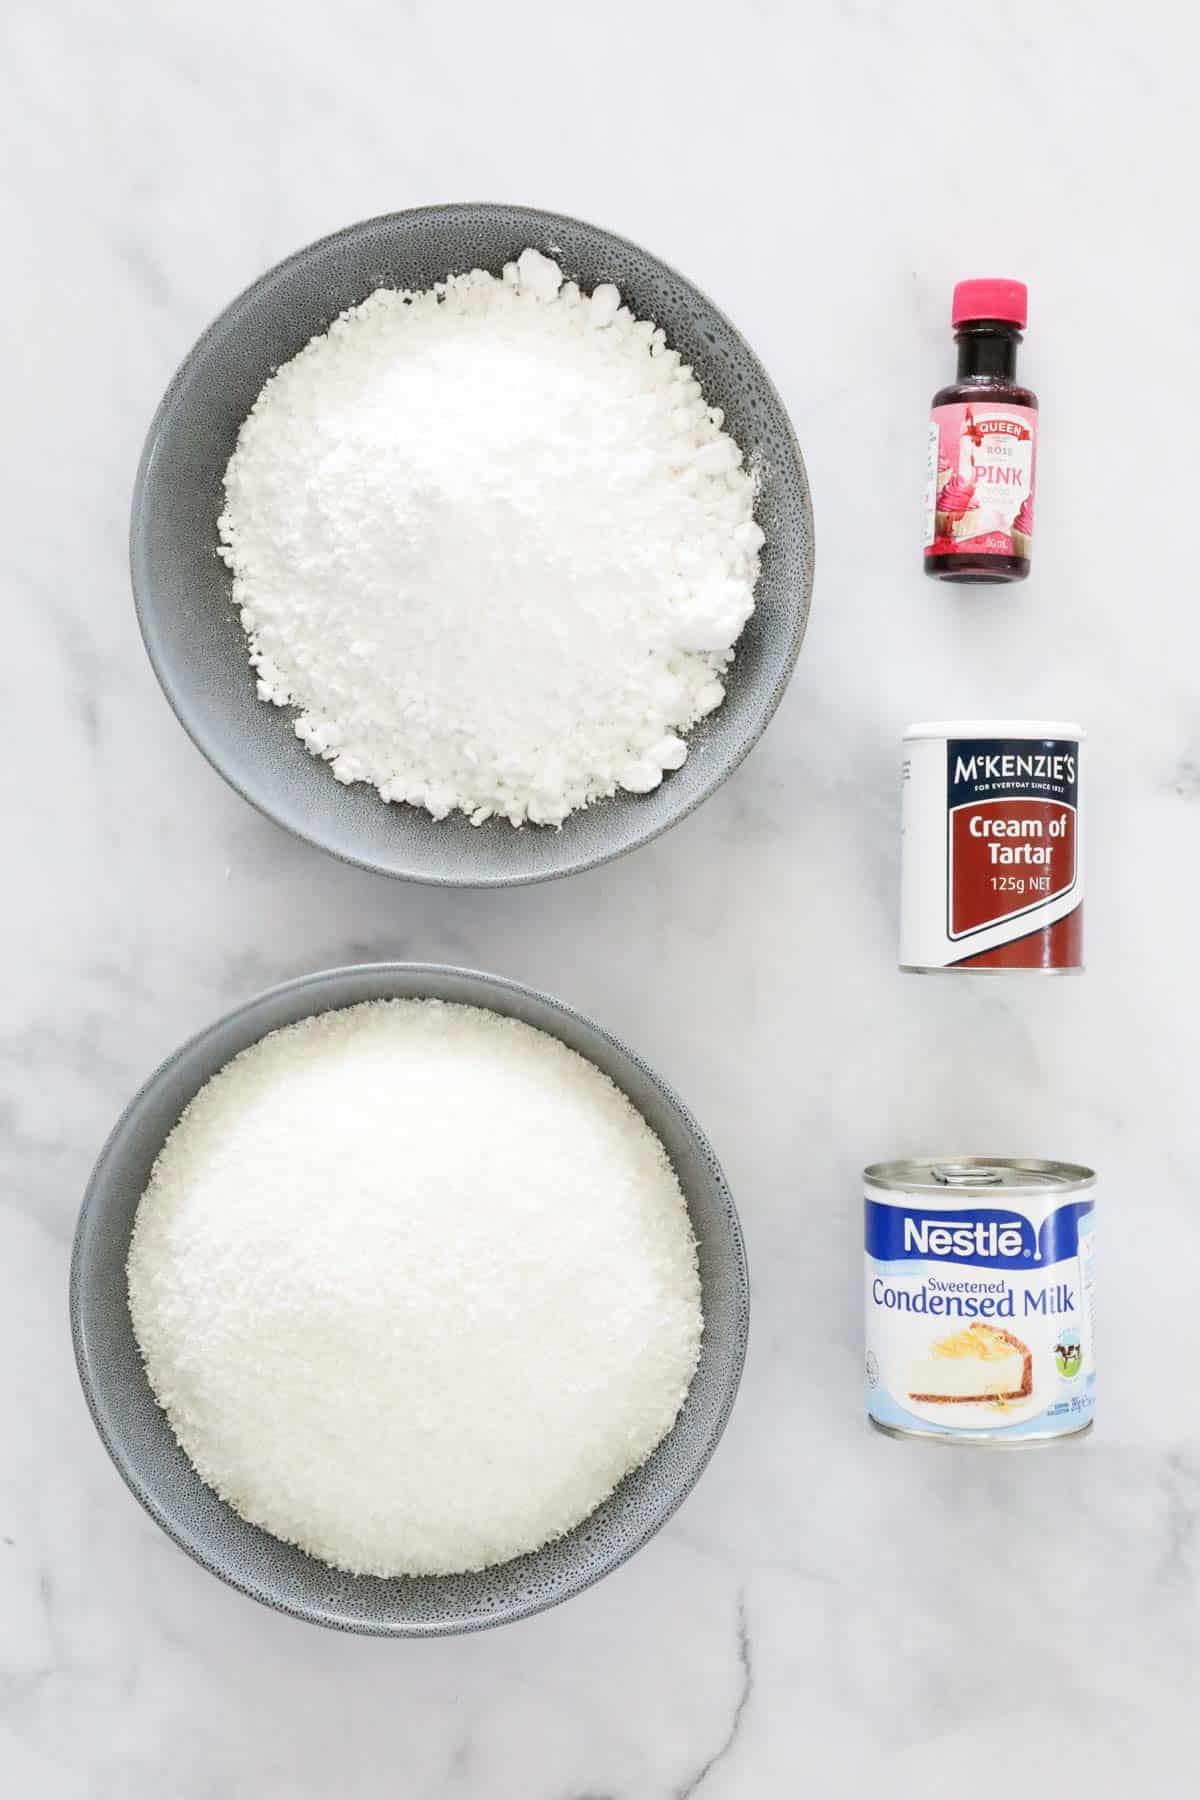 The ingredients for coconut ice.